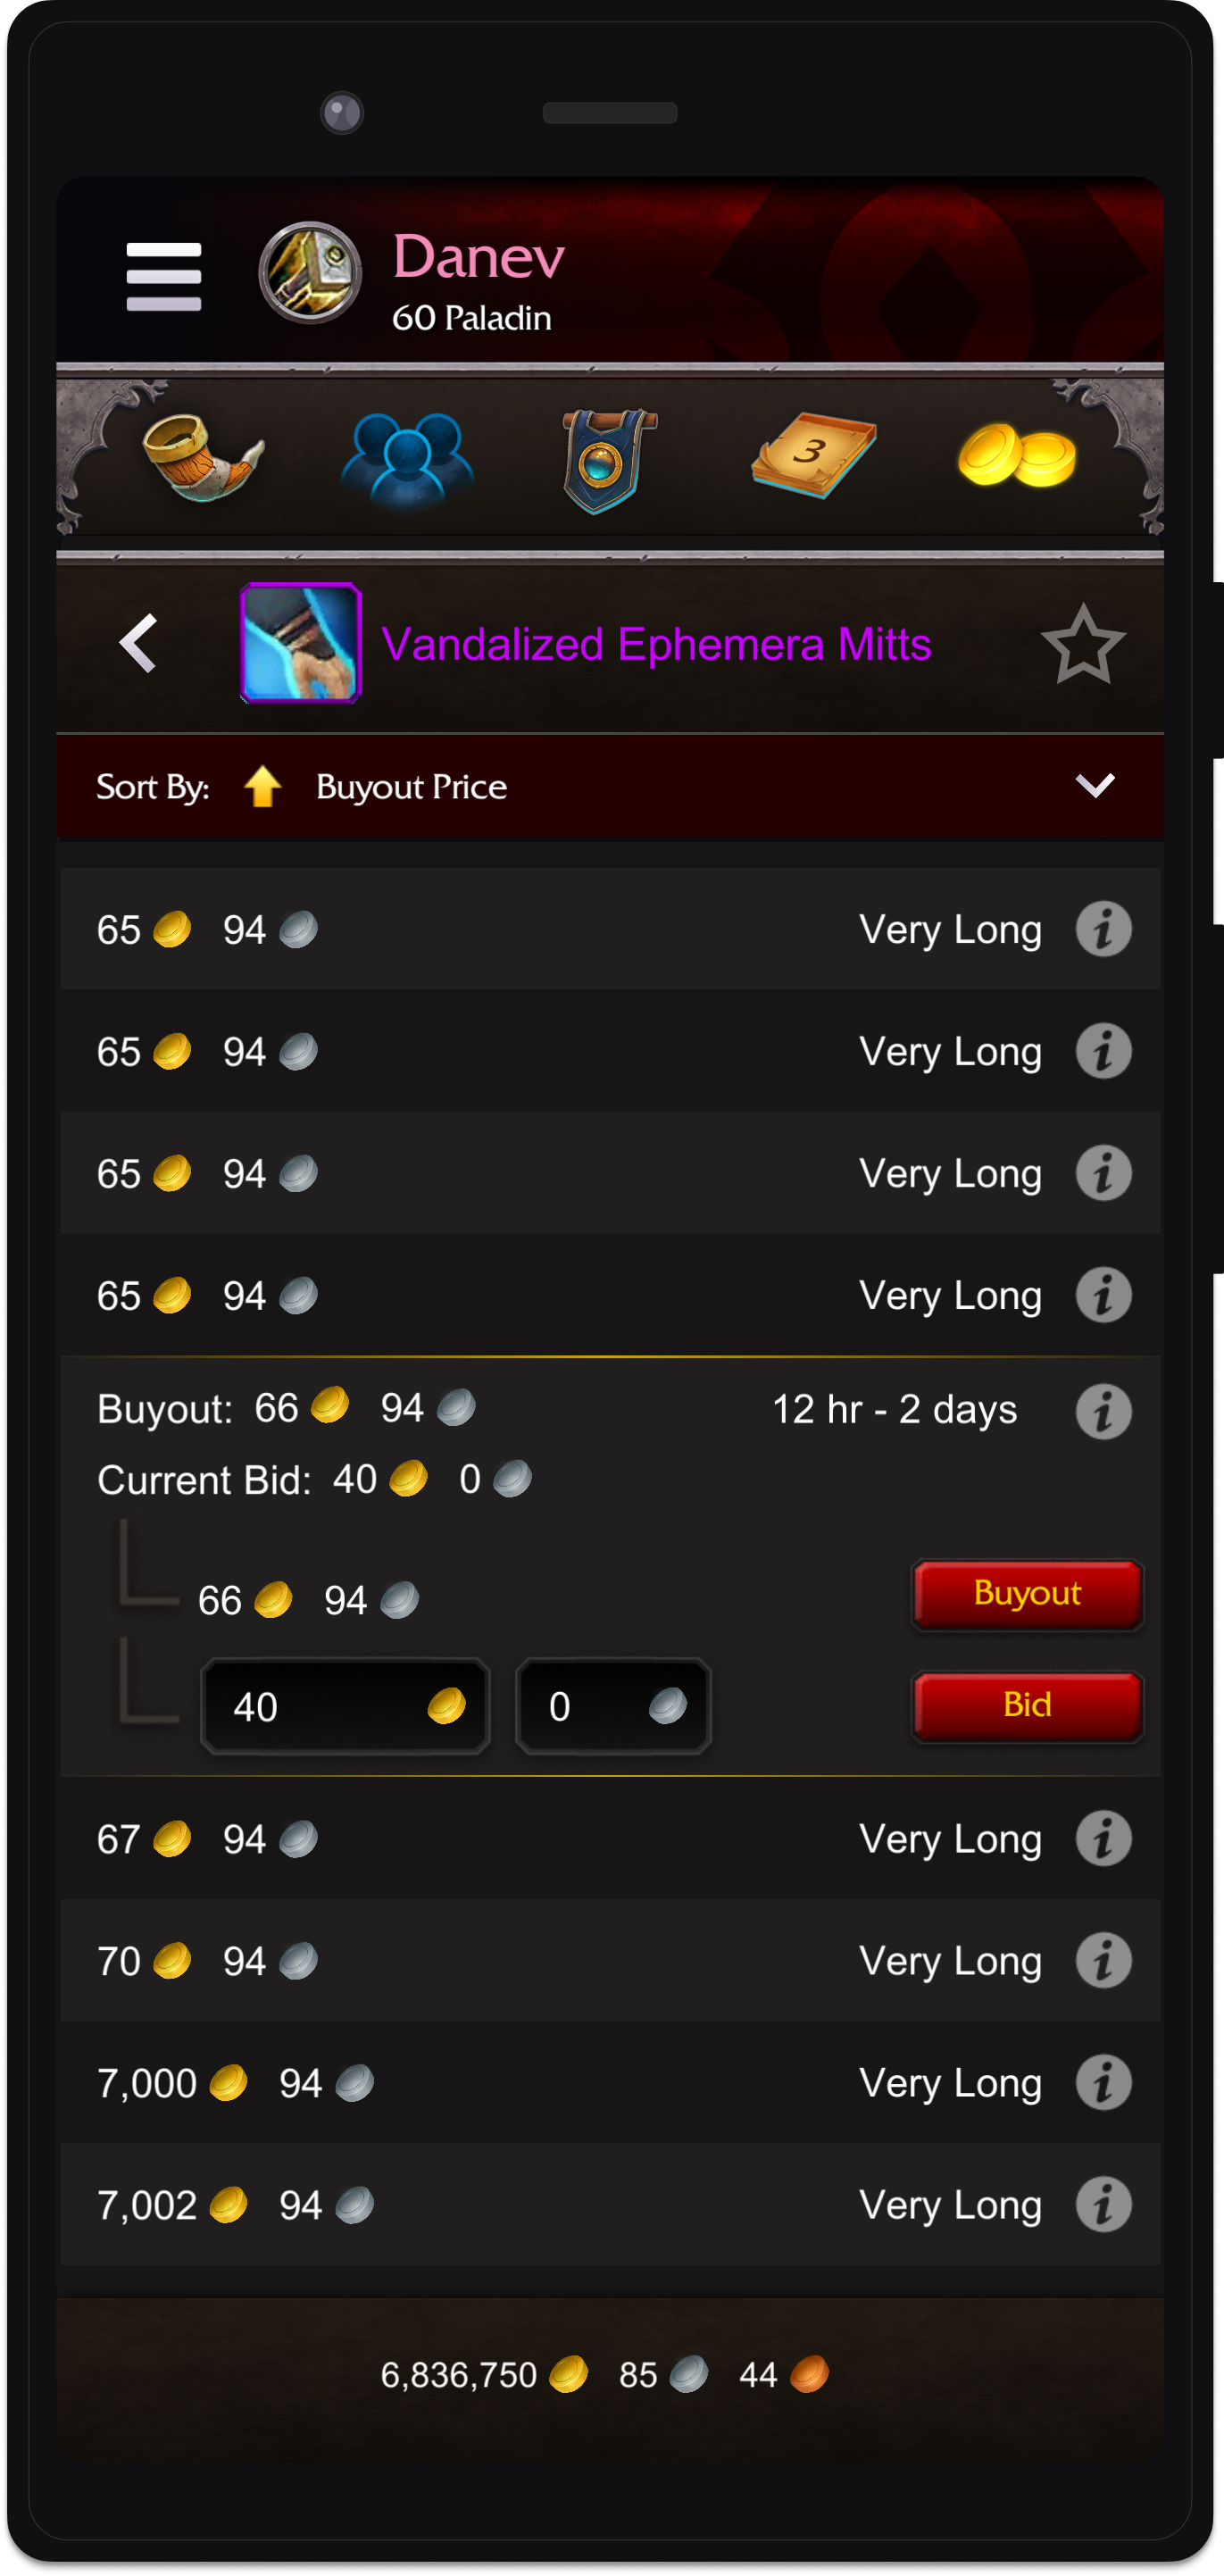 Auction house interface for placing a bid on an item.